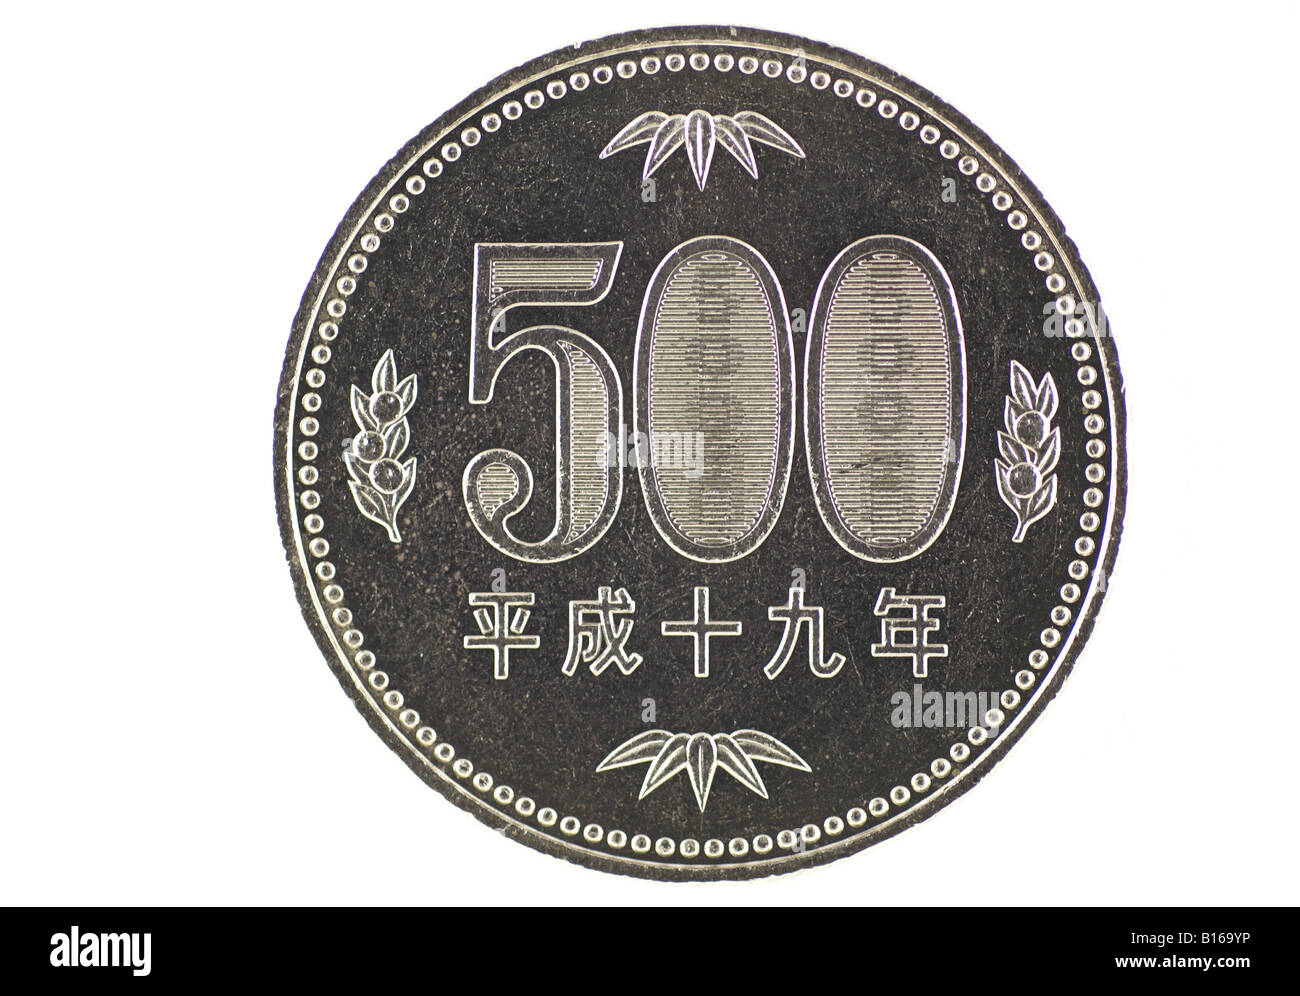 Close-up of the back of a 500 yen coin. Stock Photo